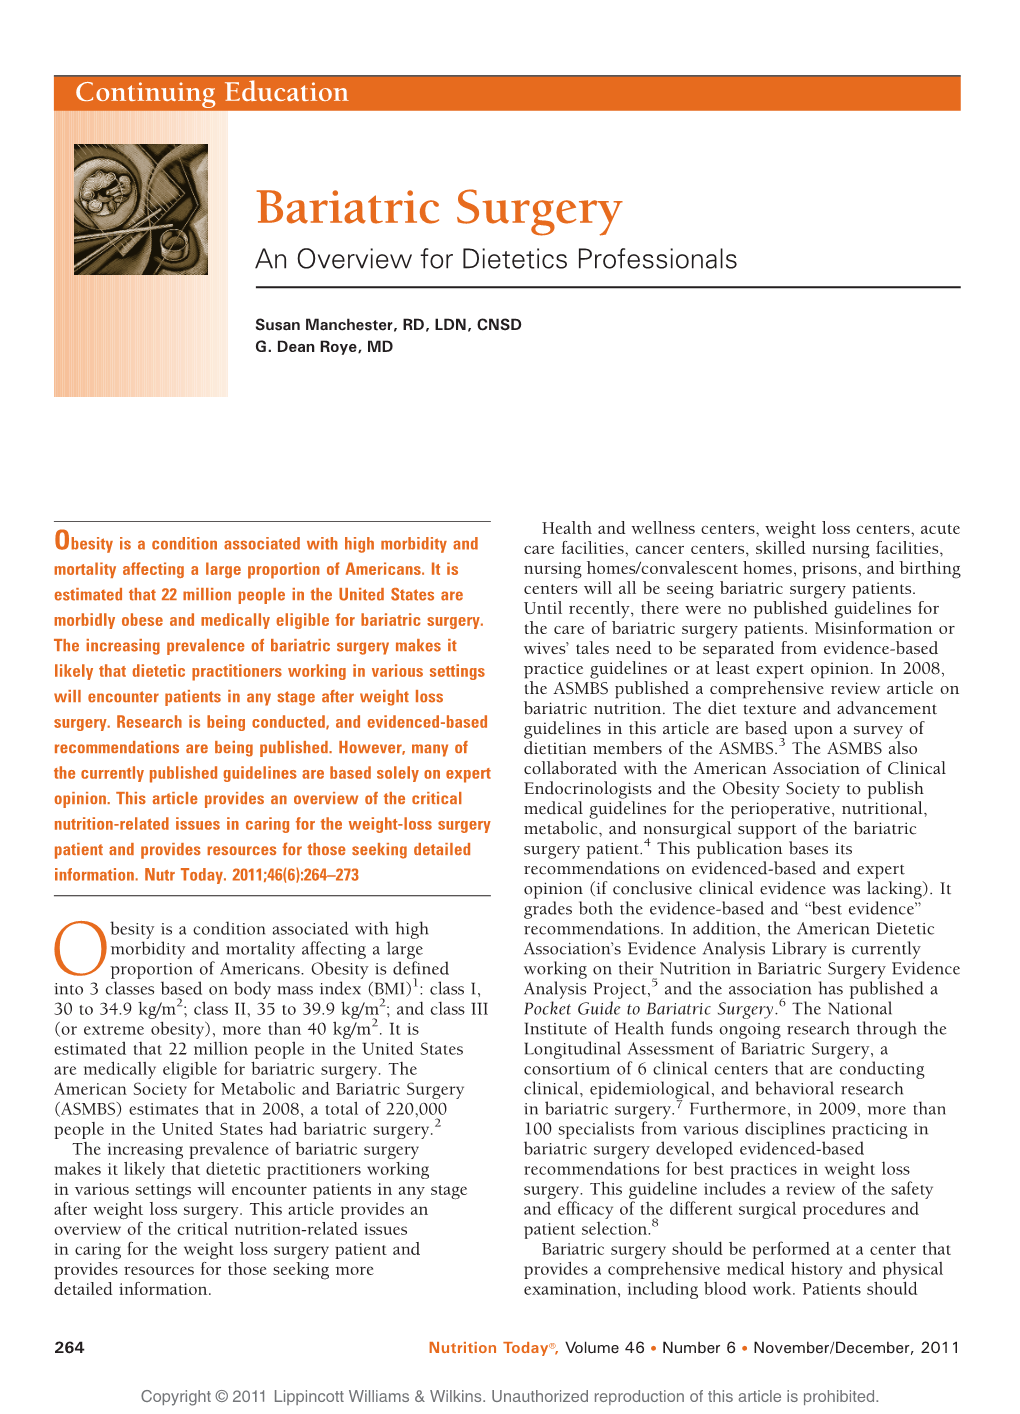 Bariatric Surgery an Overview for Dietetics Professionals